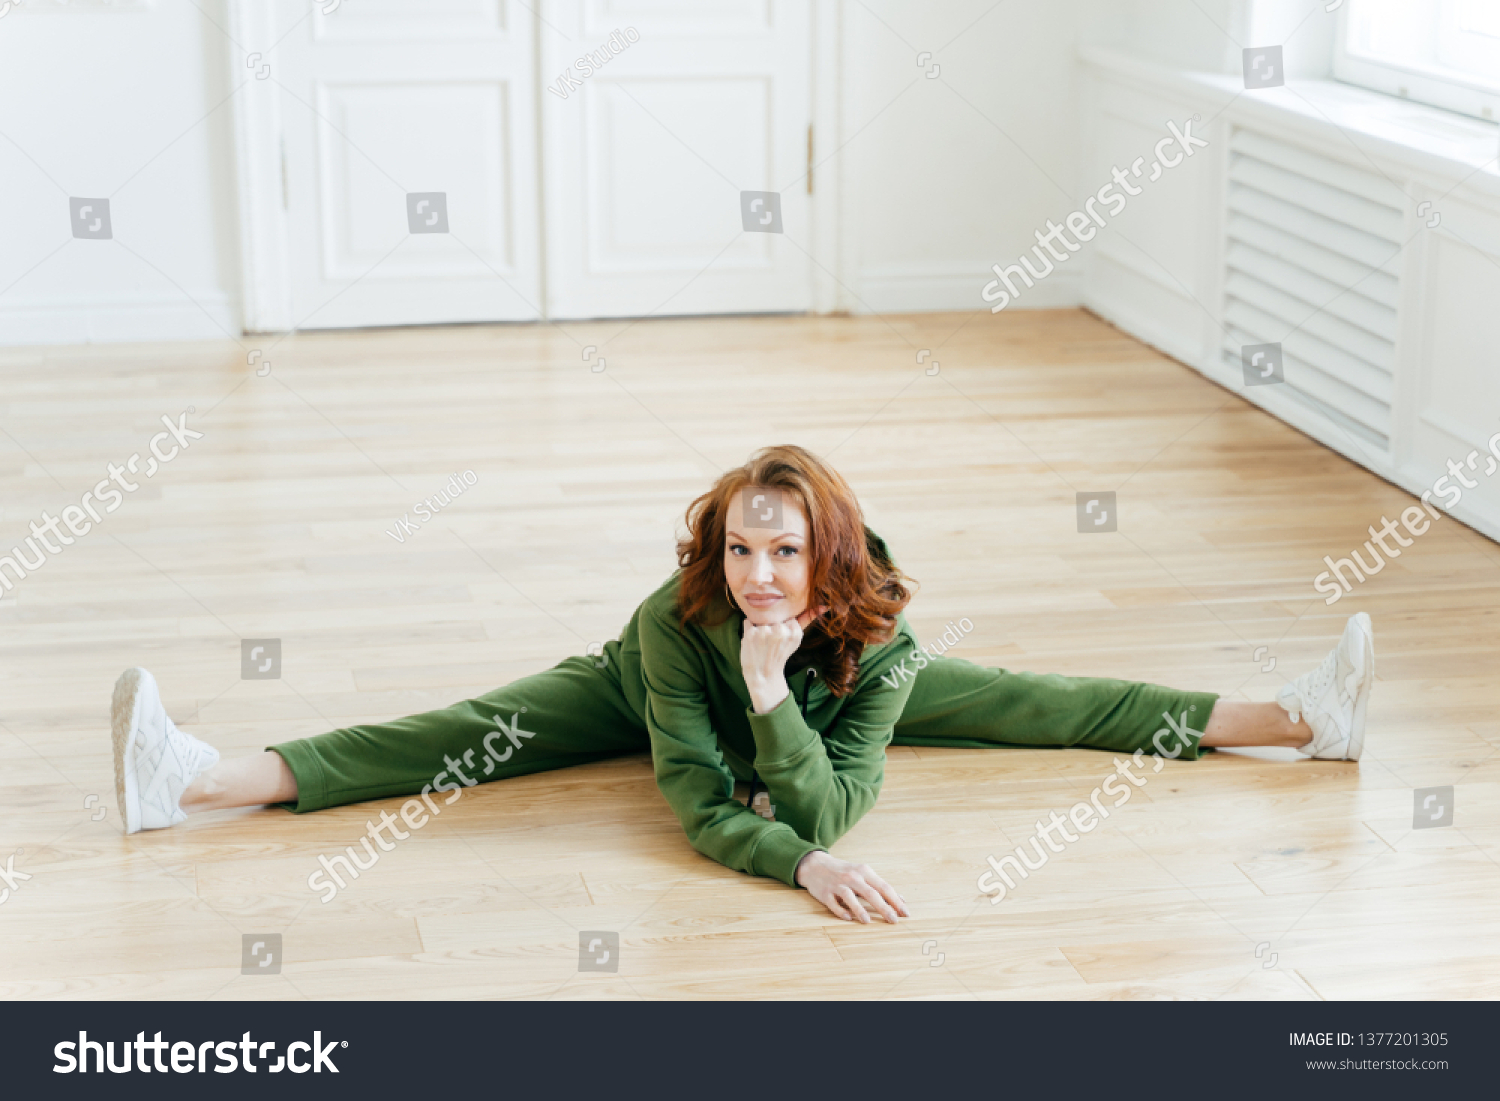 Flexibility, fitness and stretching concept. Attractive redhead female does leg split, stretches legs, wears green sweatsuit, sneakers, keeps hand under chin. Sport gymnast in active wear poses indoor #1377201305